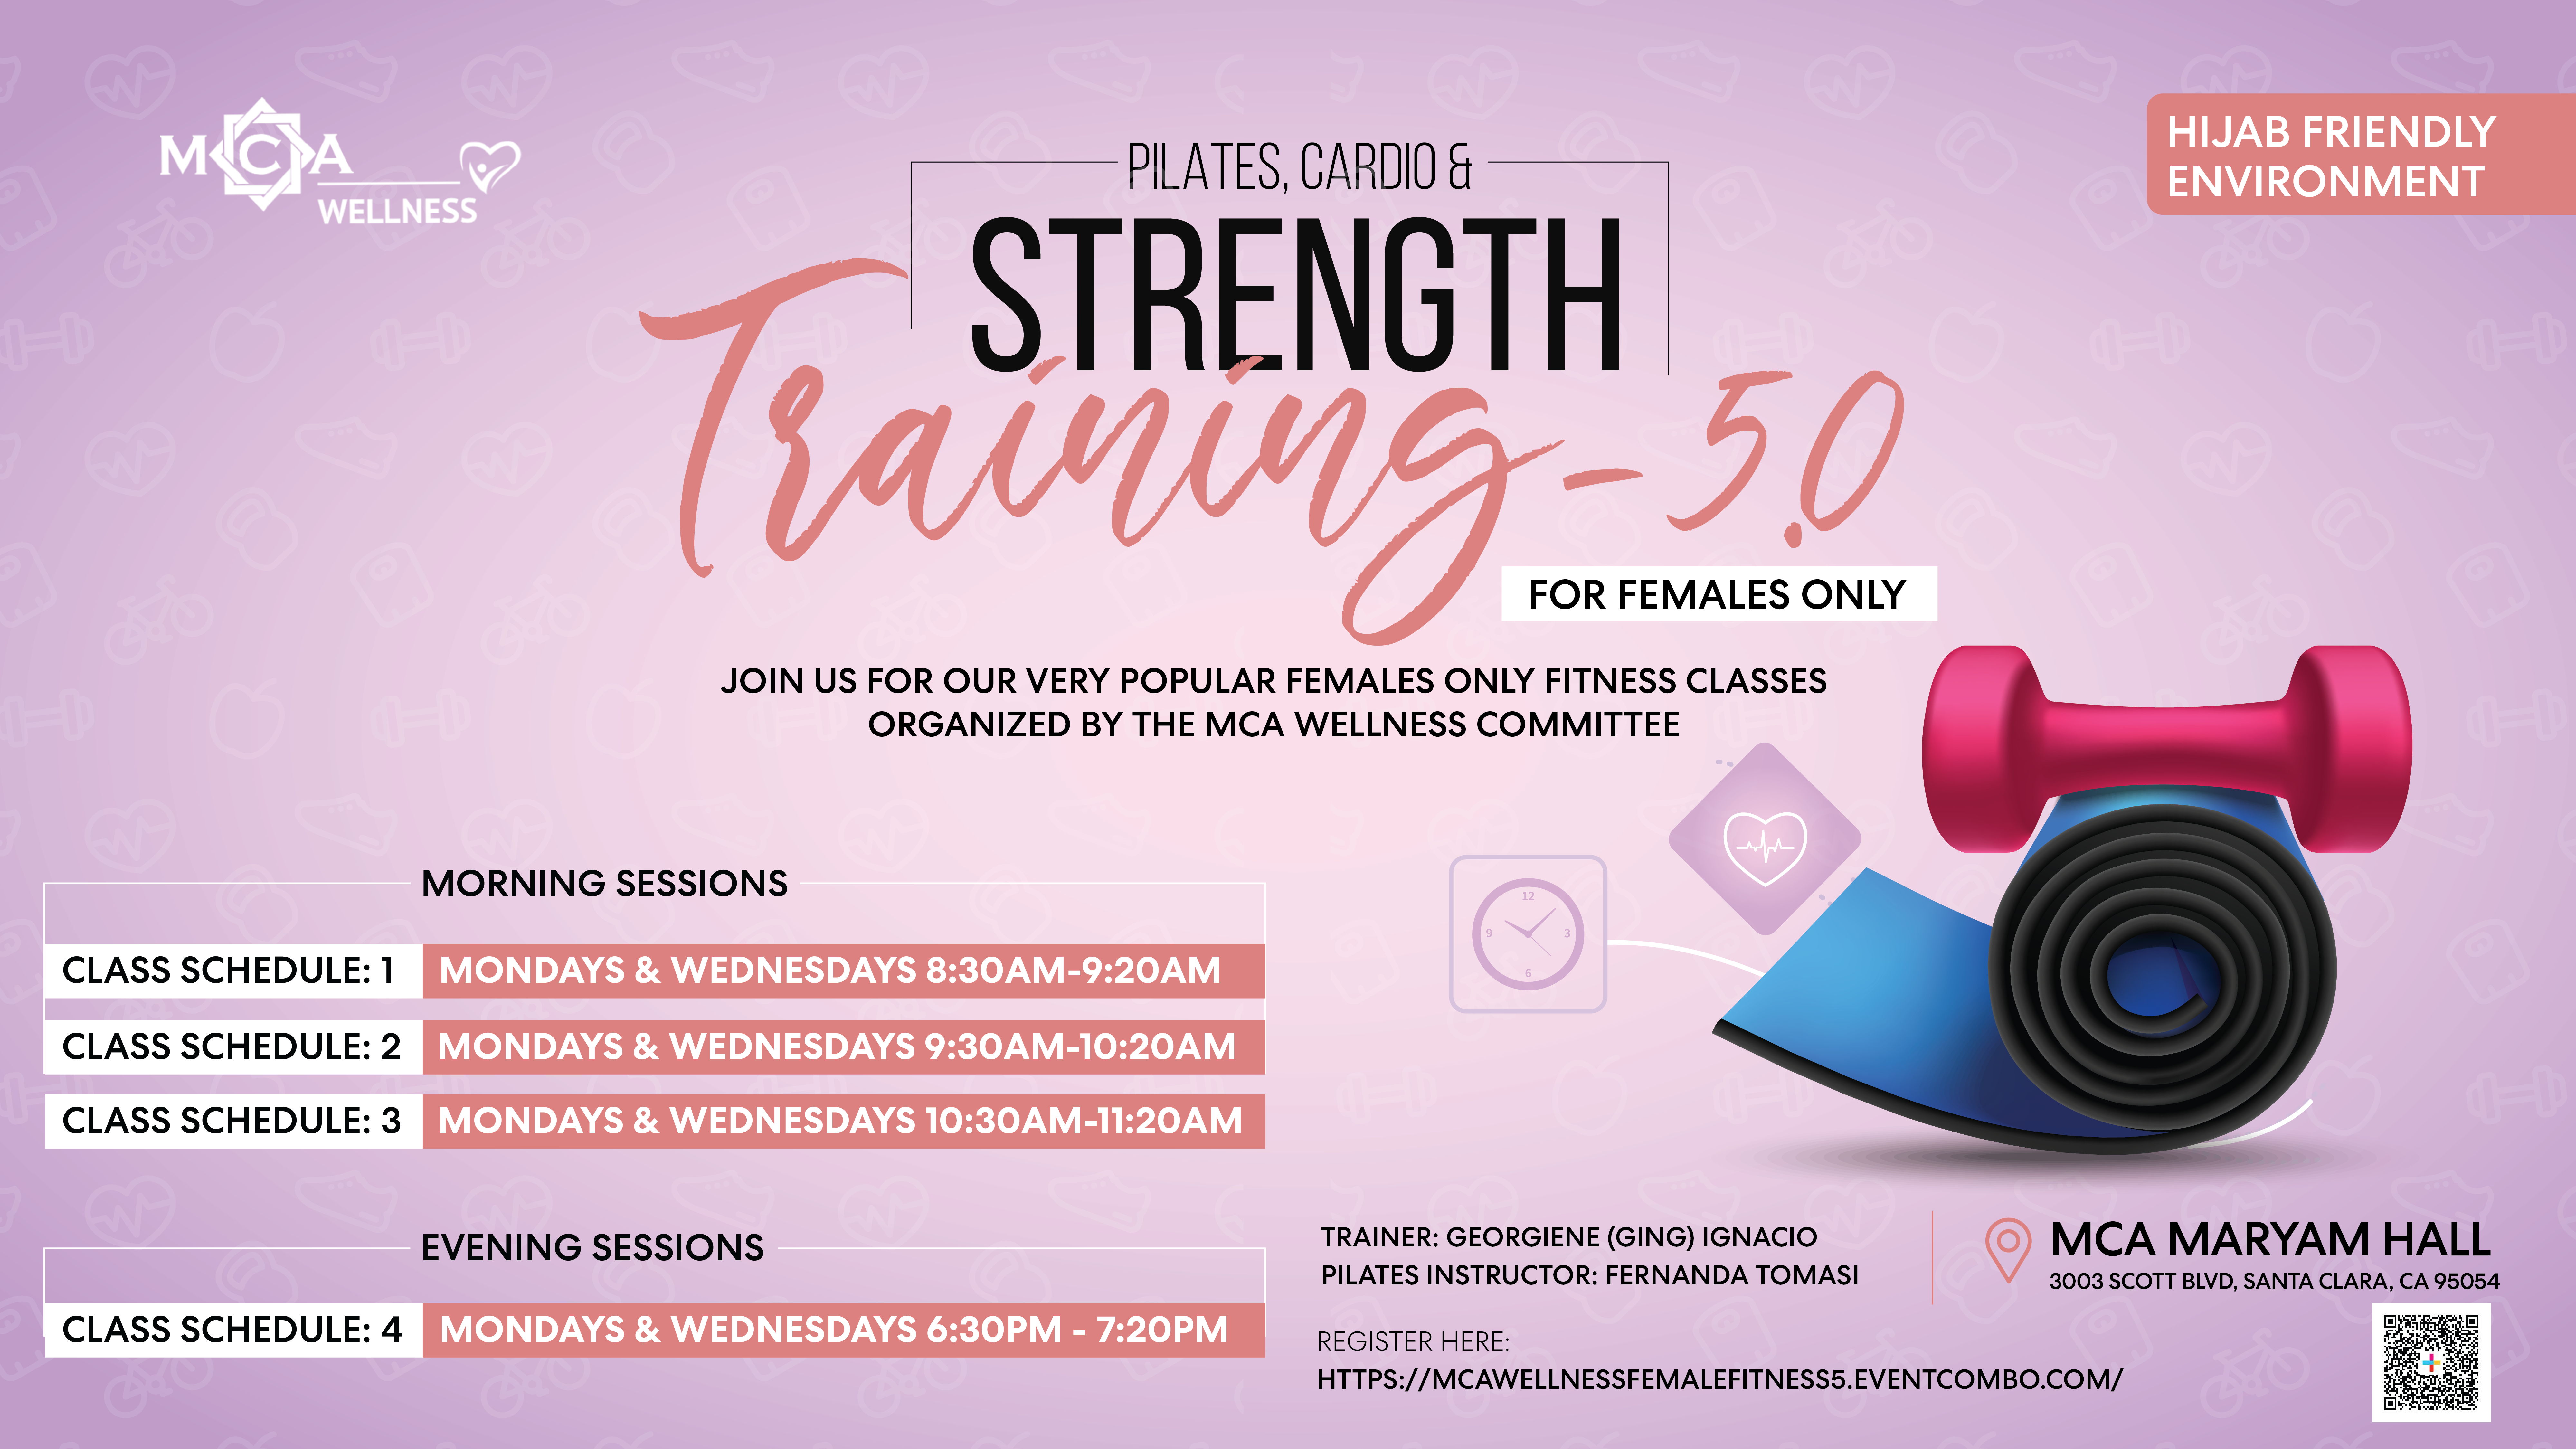 Pilates, Cardio & Strength Training Classes
For Females Only - 5.0